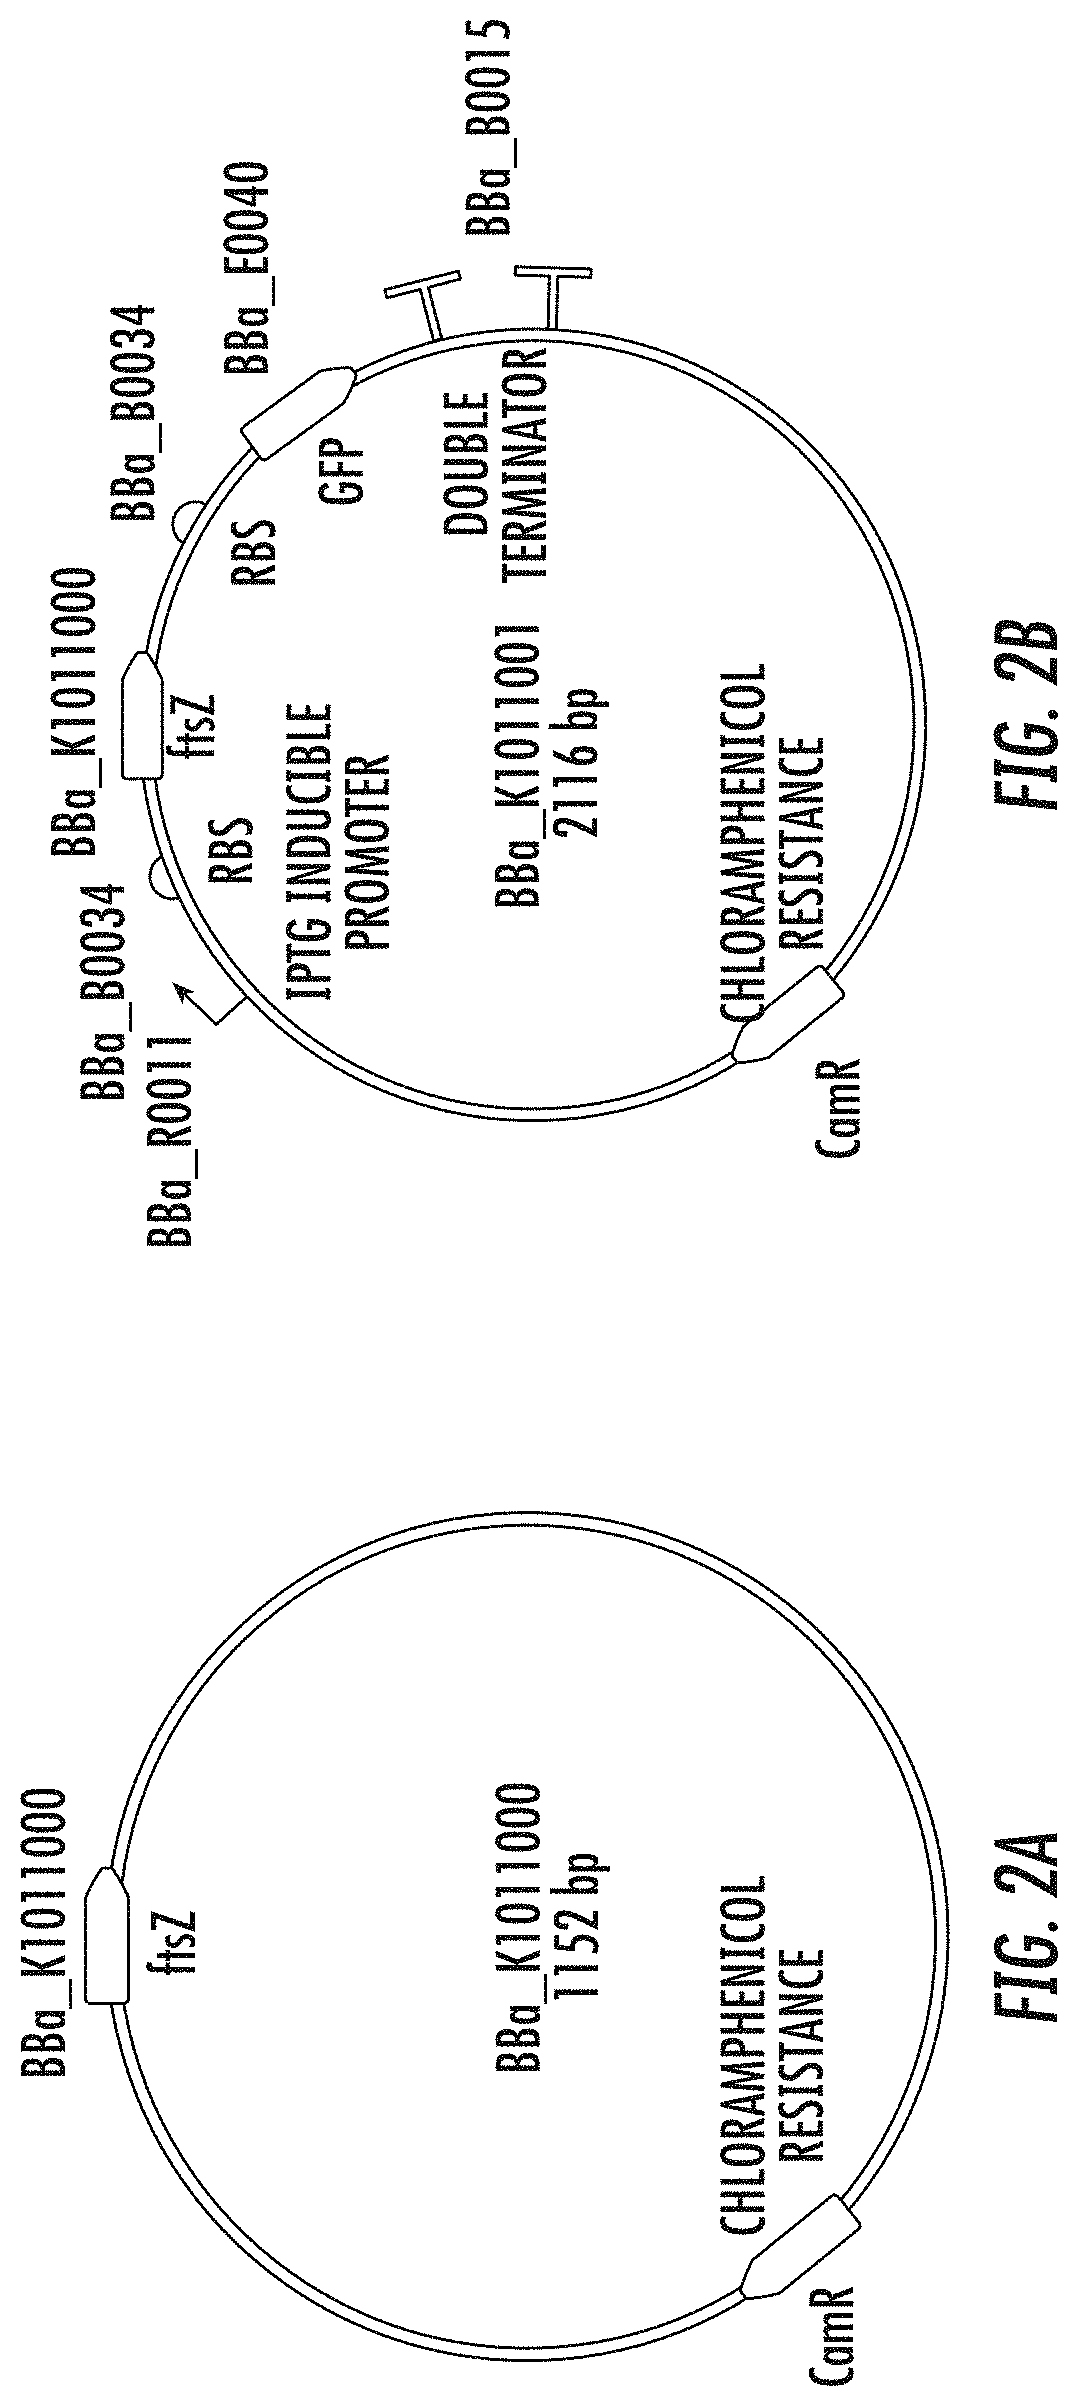 Compositions and Methods for Pesticide Degradation